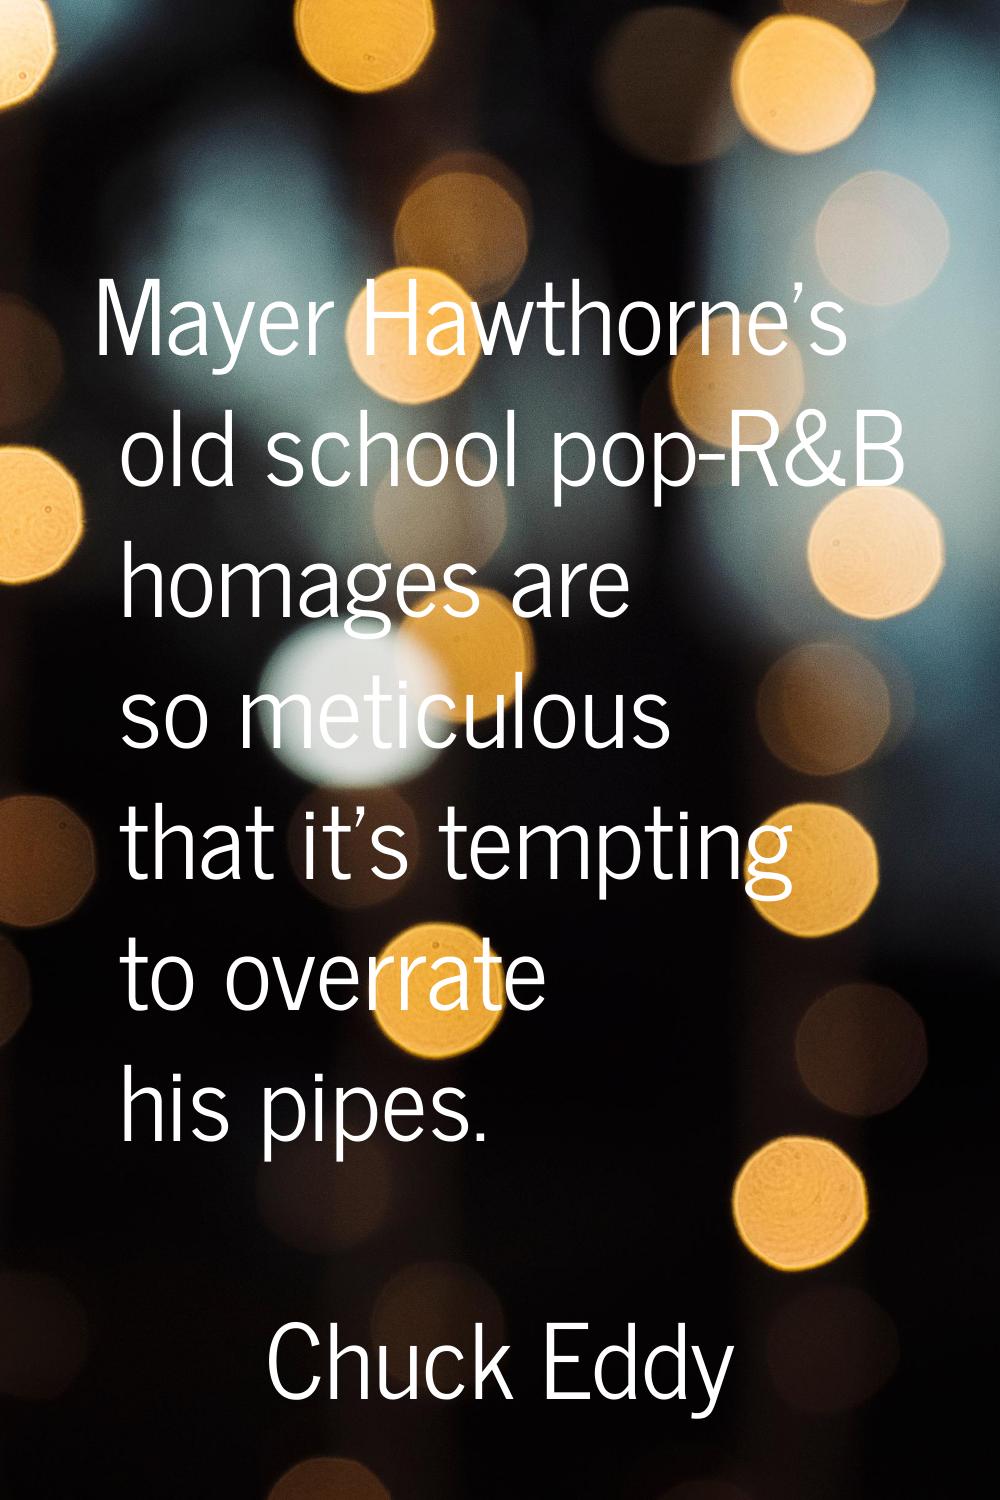 Mayer Hawthorne's old school pop-R&B homages are so meticulous that it's tempting to overrate his p